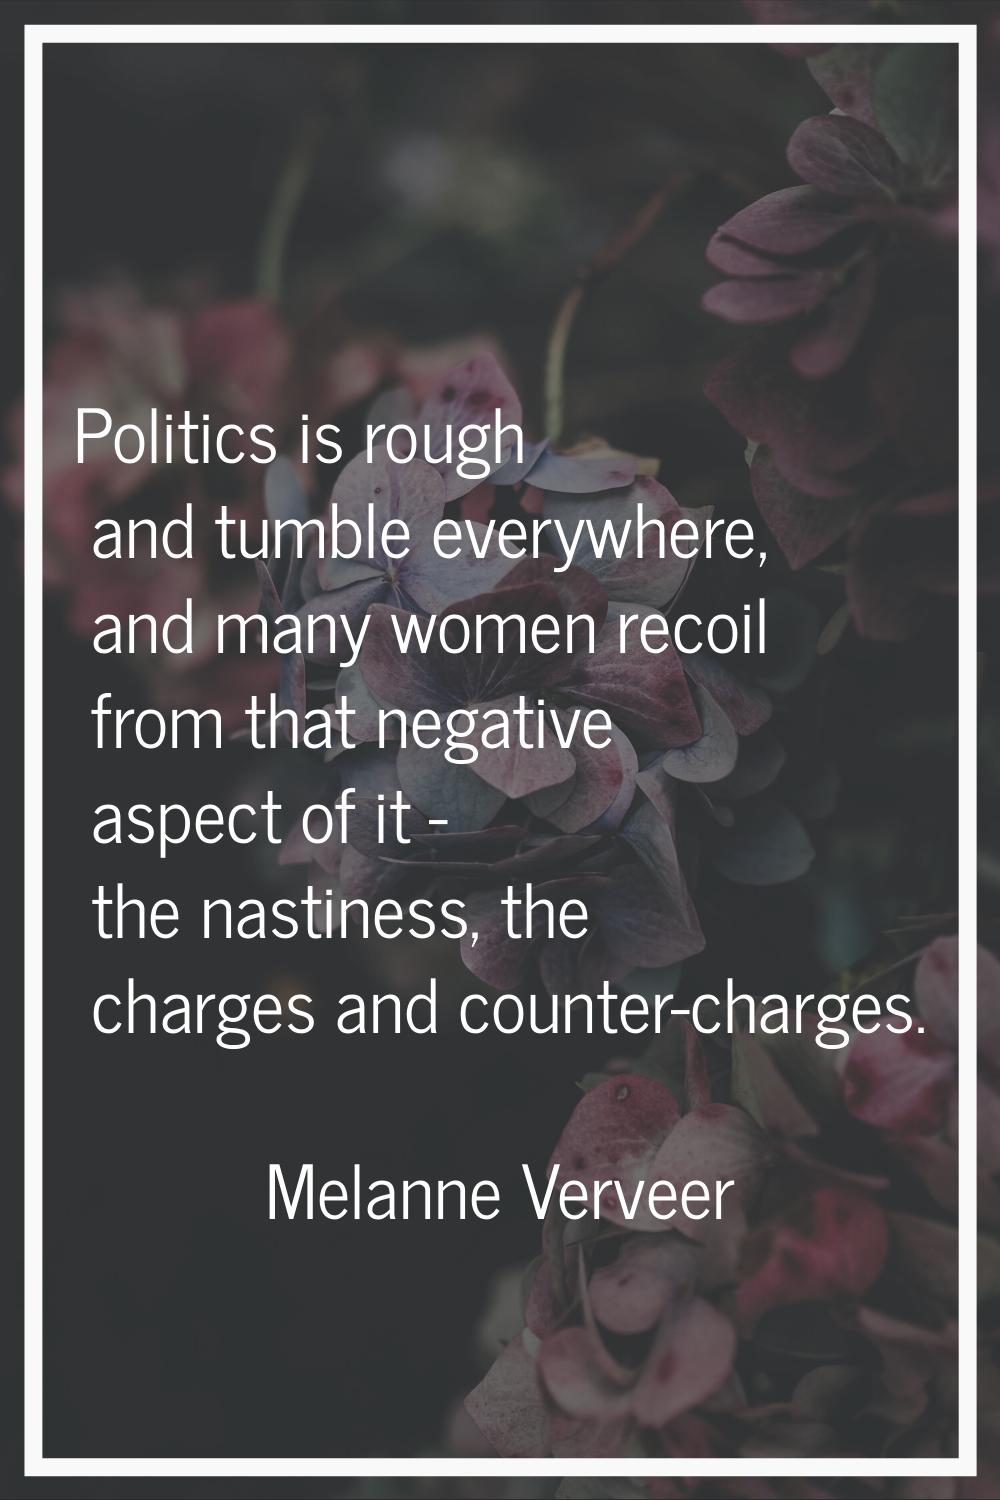 Politics is rough and tumble everywhere, and many women recoil from that negative aspect of it - th